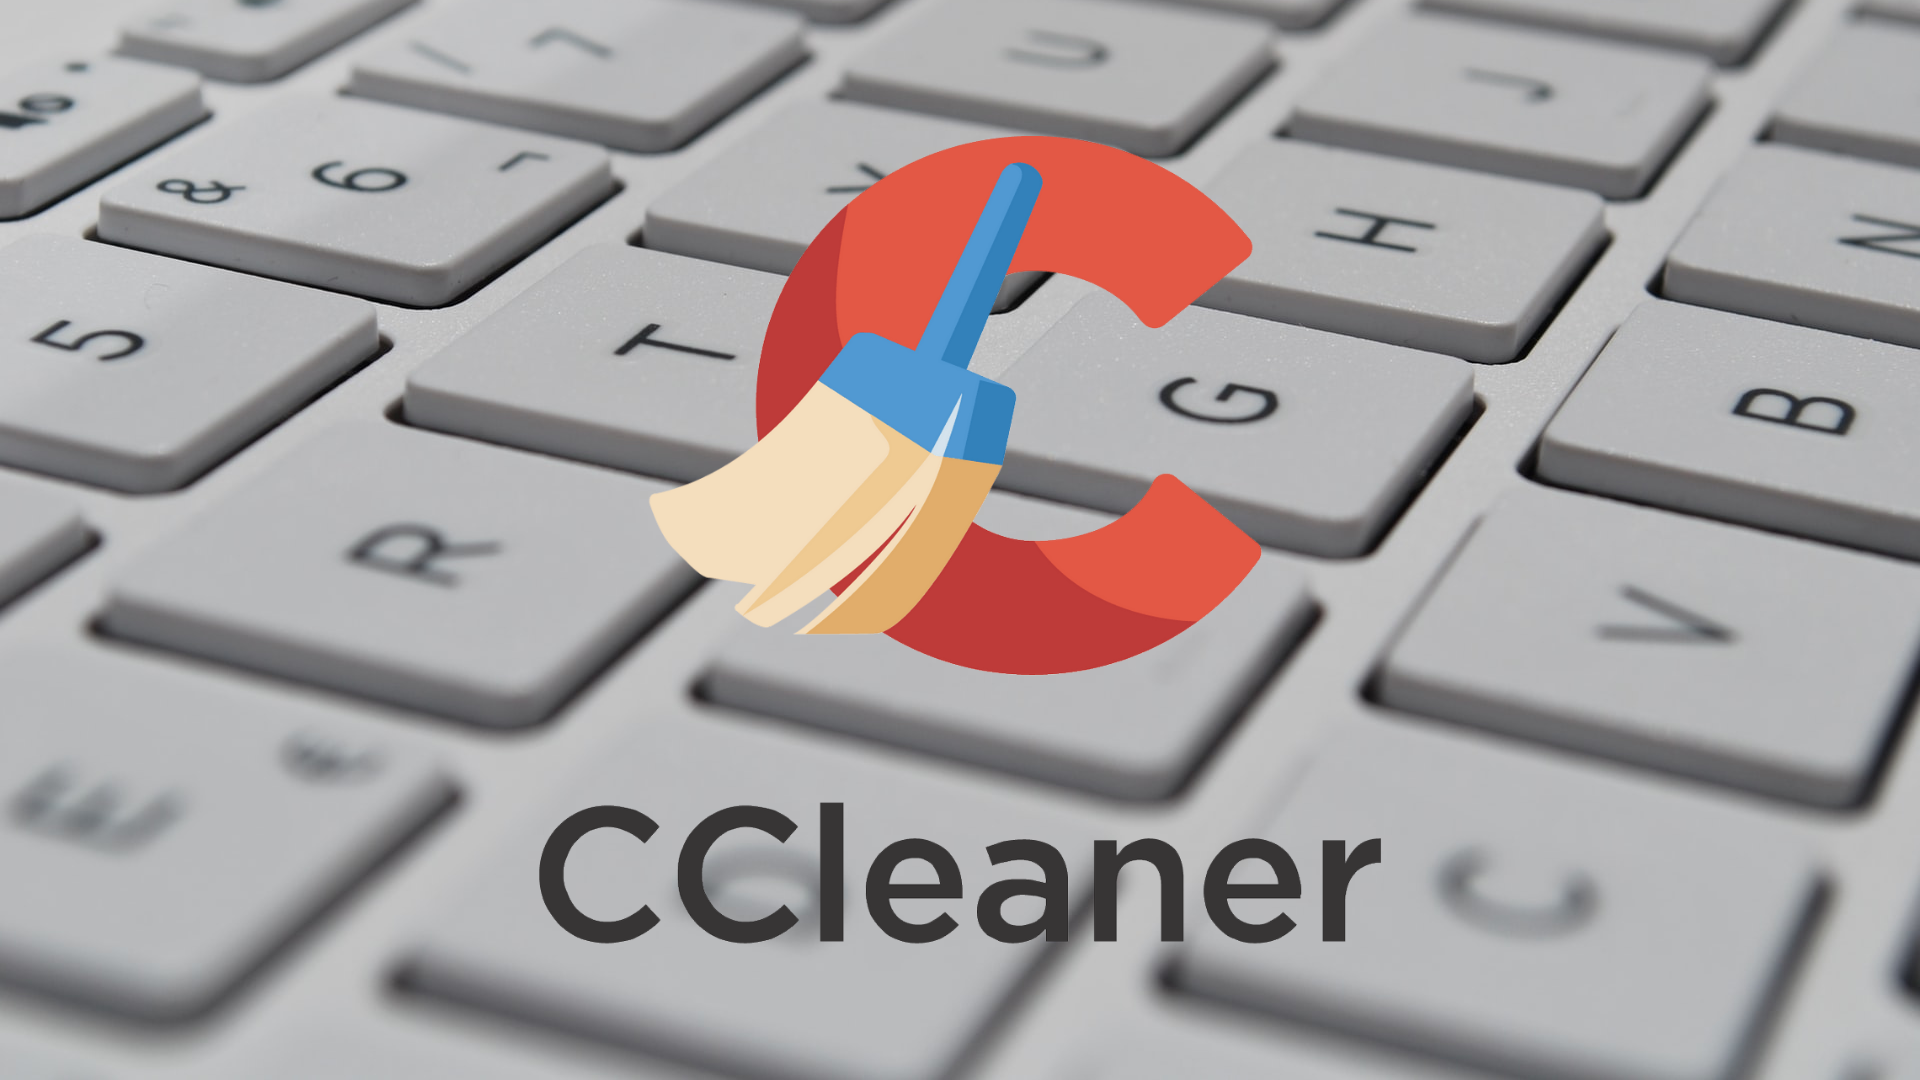 Does Ccleaner Allows Free Download